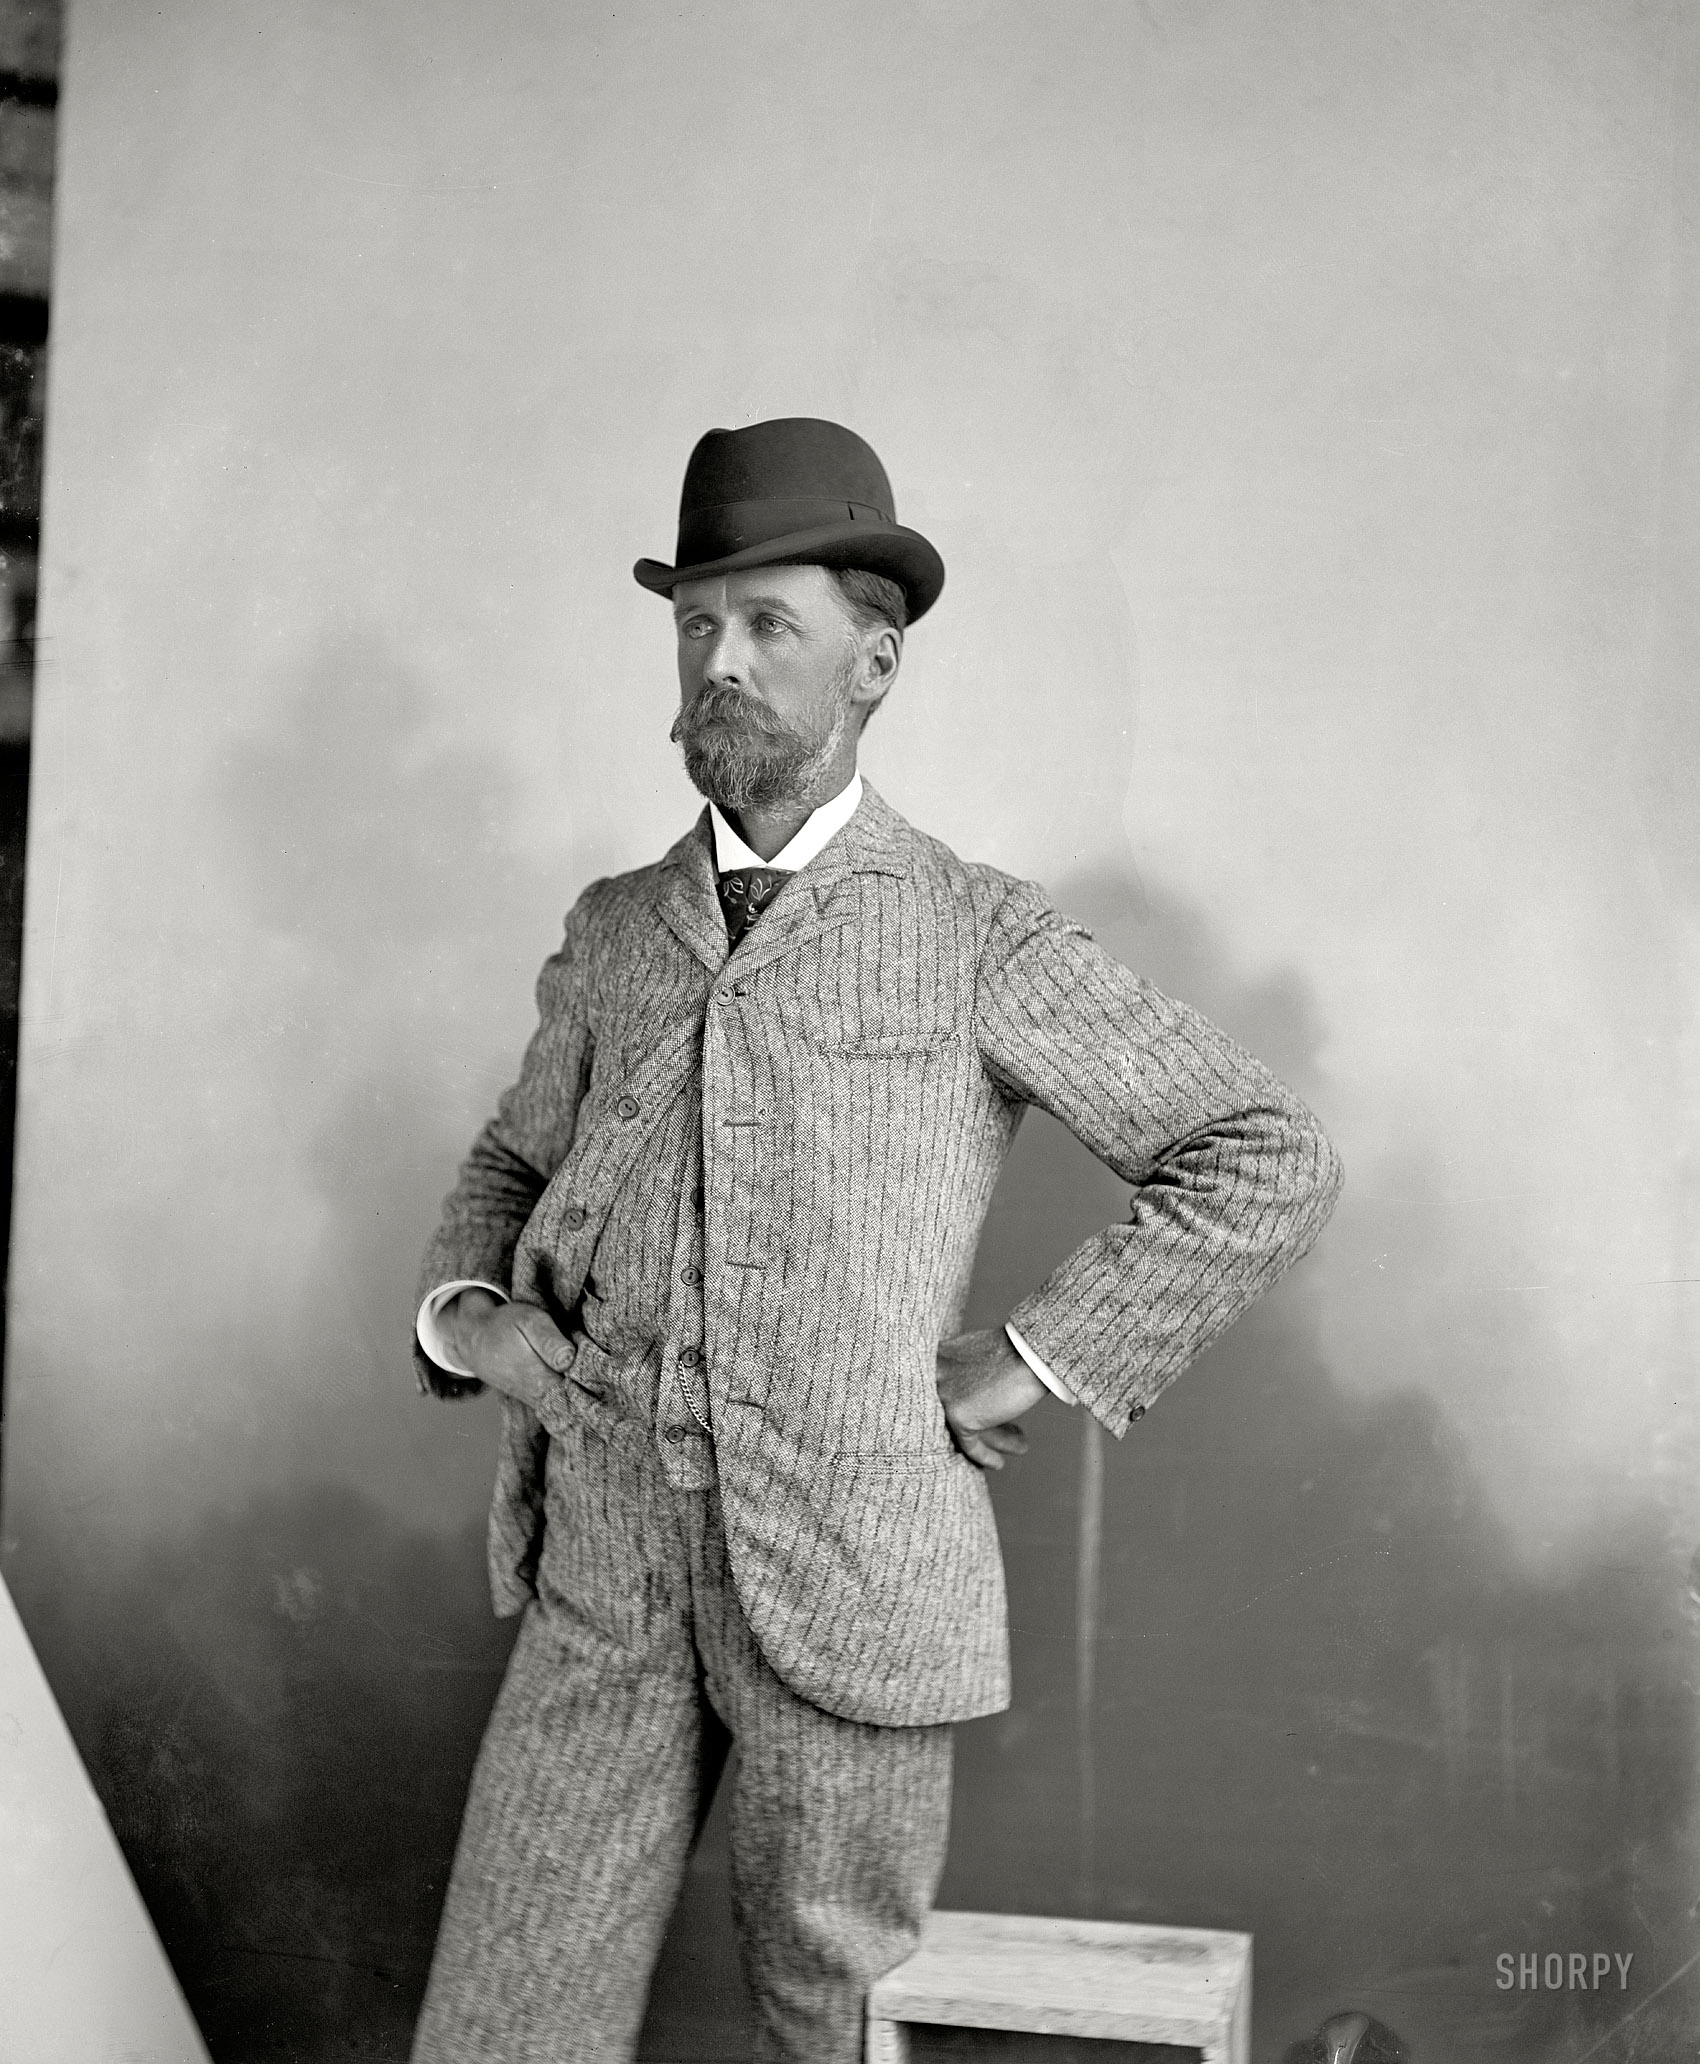 August 1892. "The latest style." Fashion-forward dry plate glass negative by William Henry Jackson. (UPDATE: This is a self-portrait.) View full size.